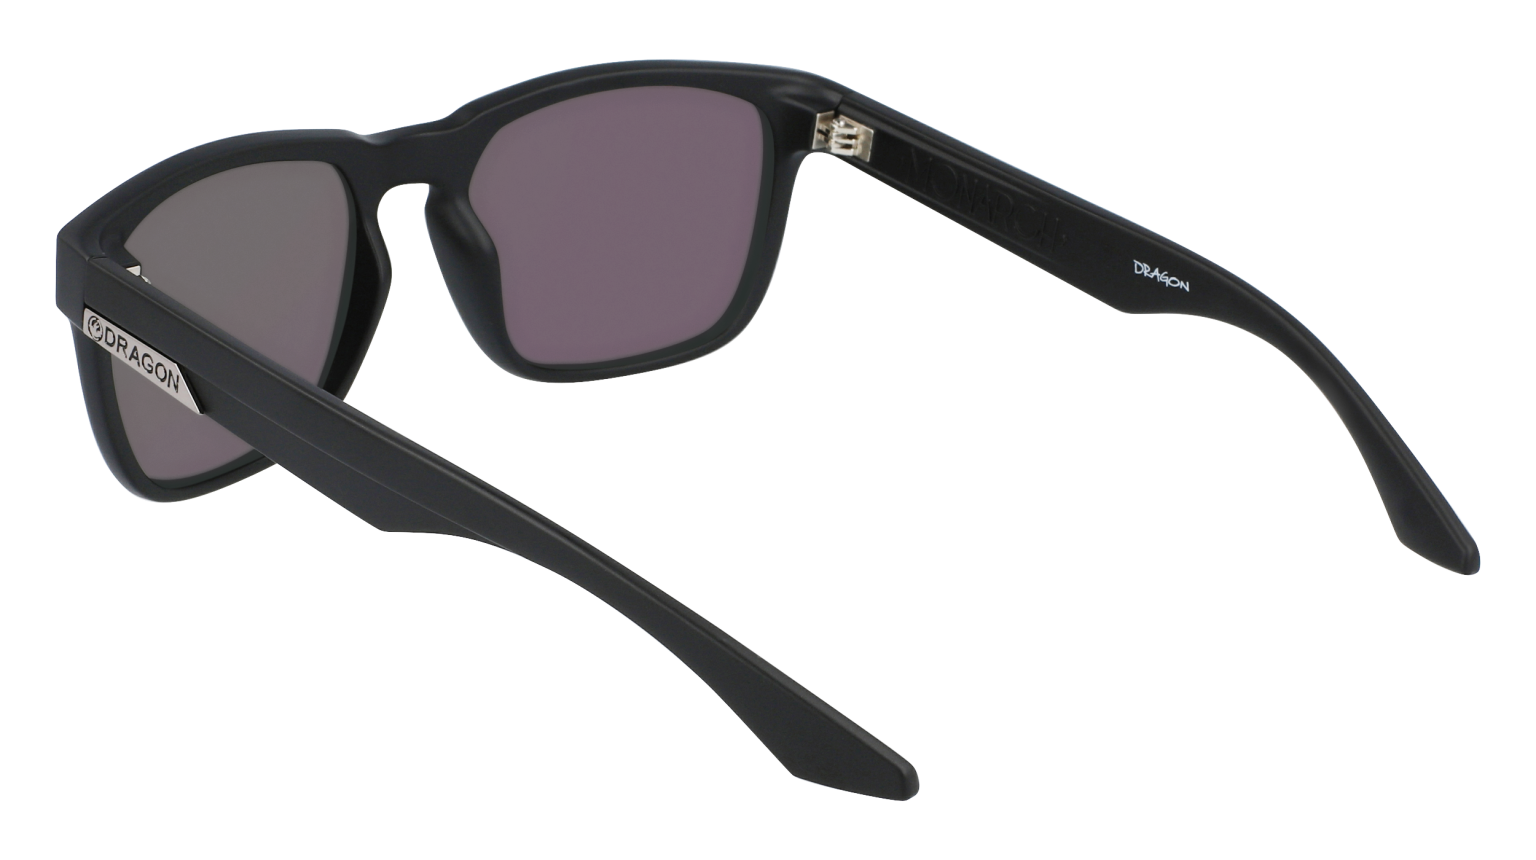 MONARCH - Matte Black with Lumalens Green Ionized Lens